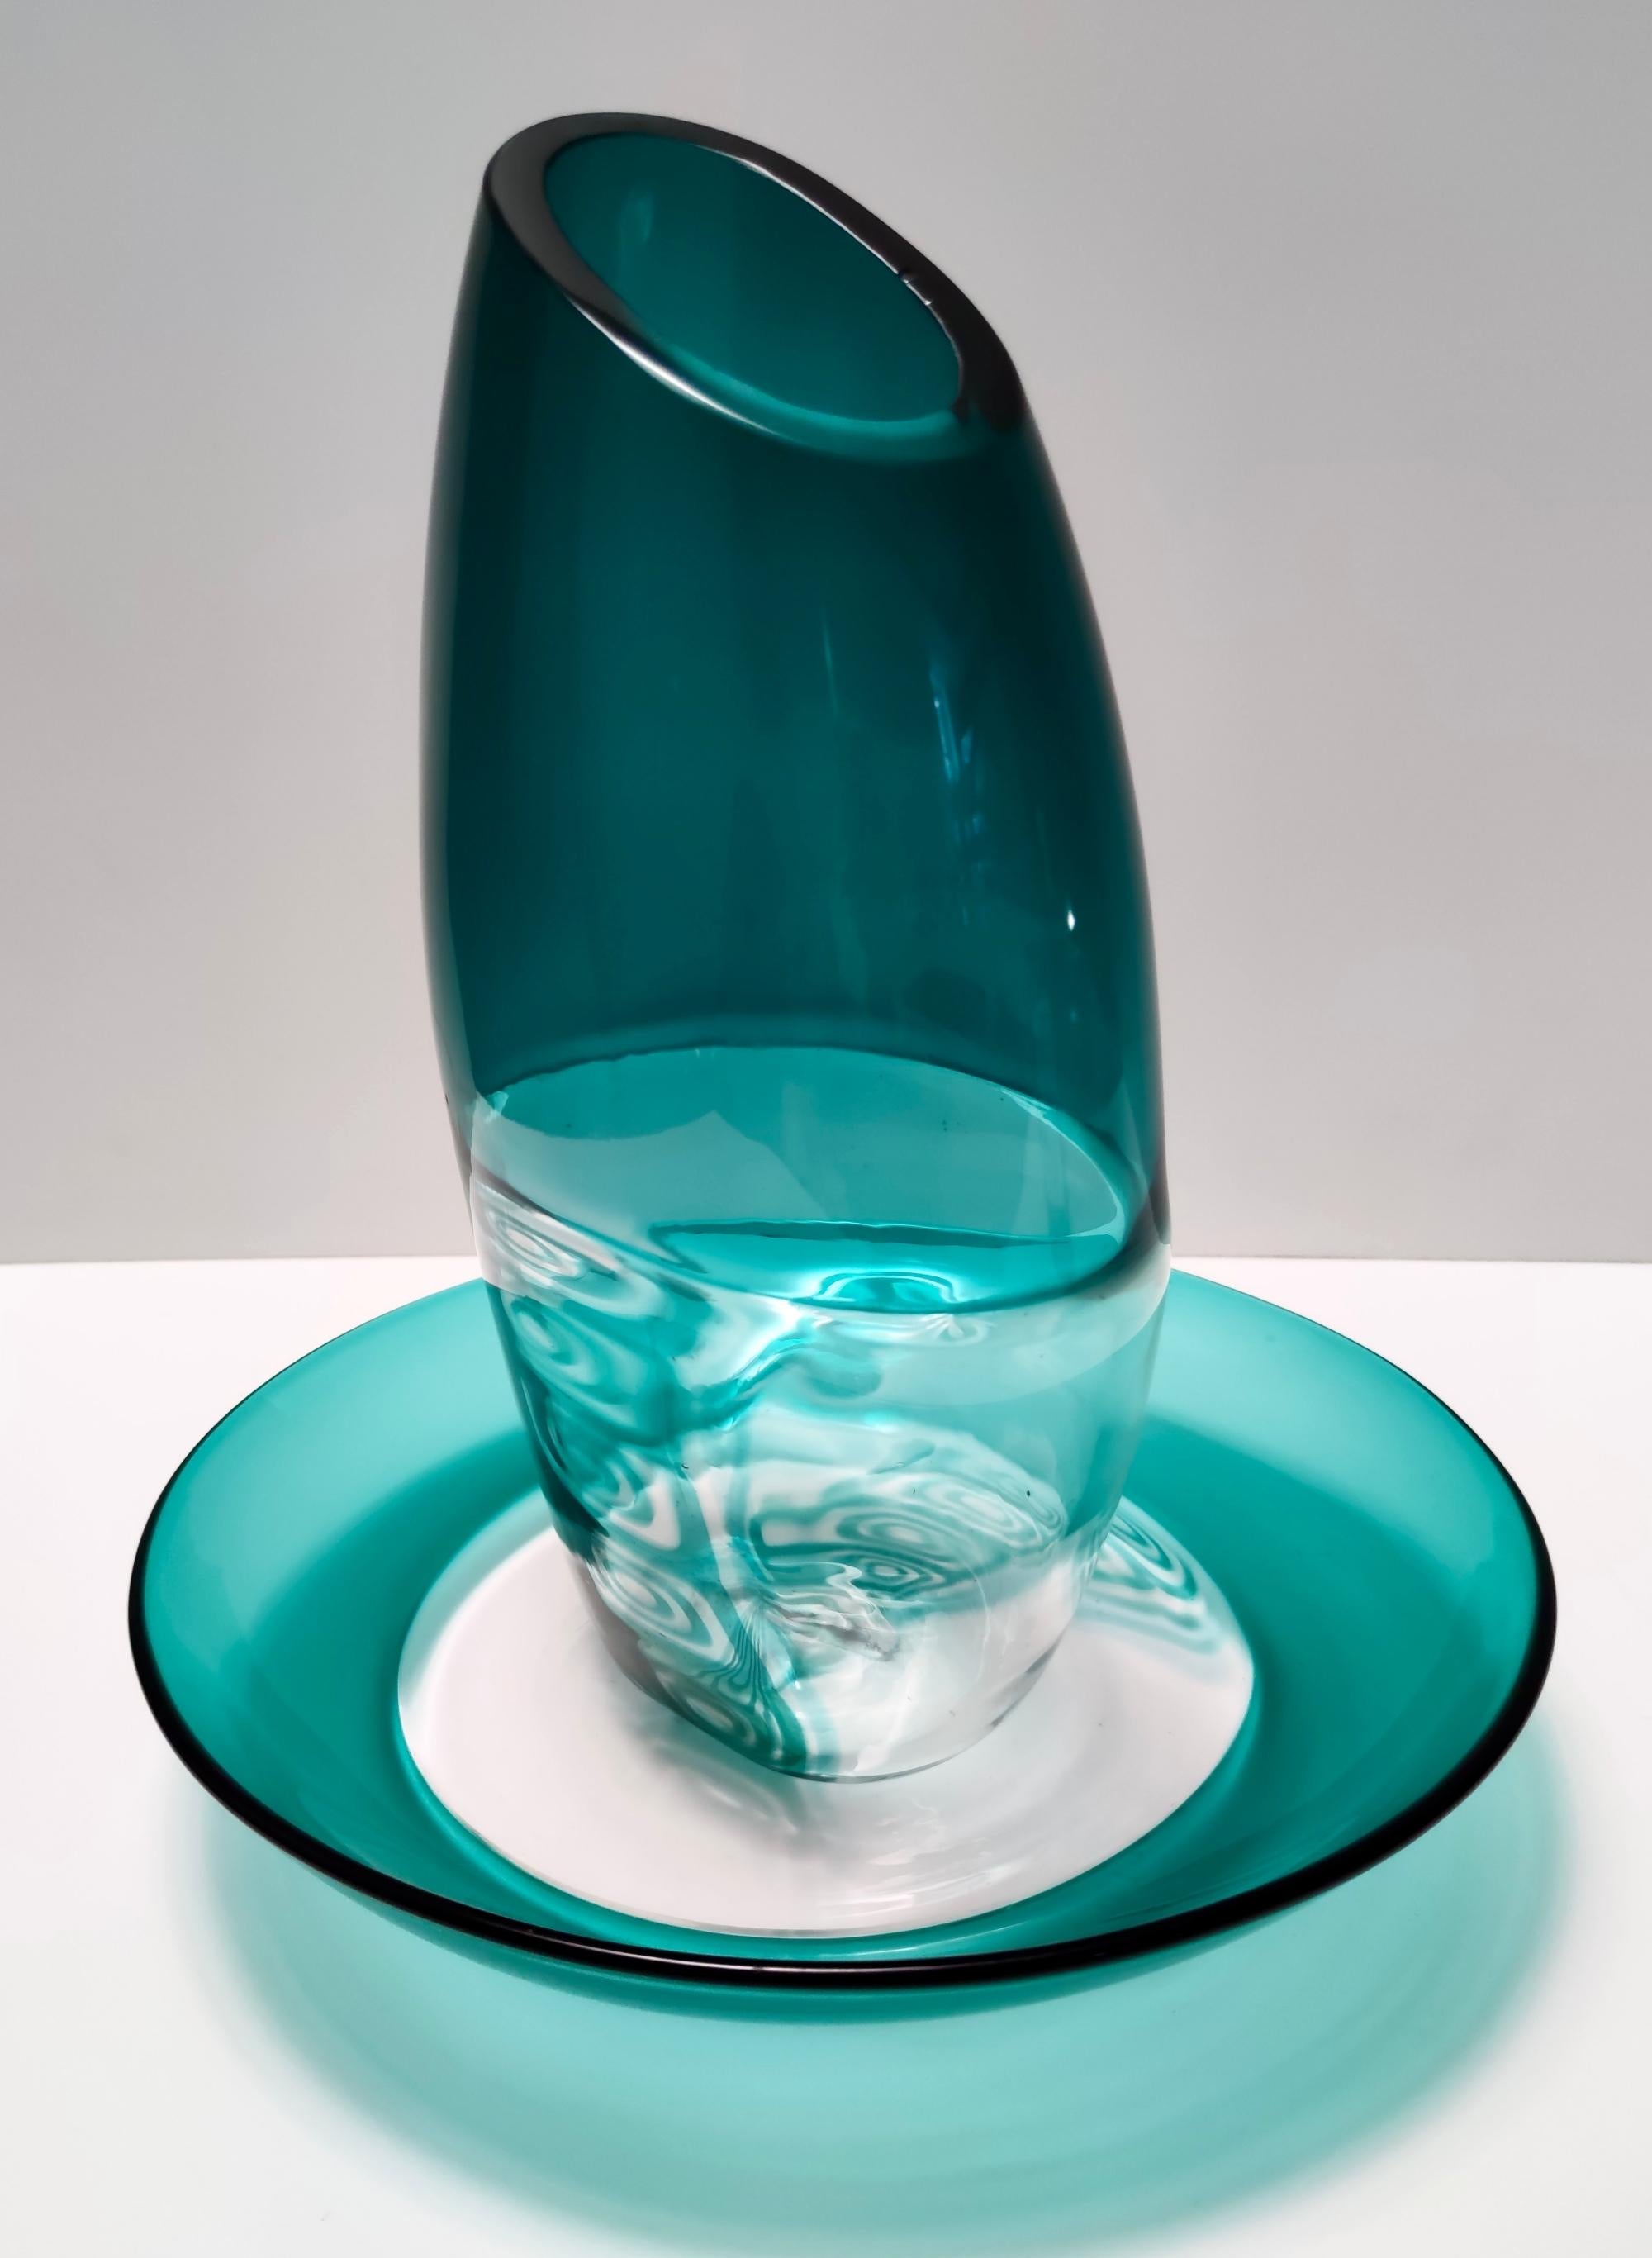 Italian Postmodern Teal Murano Glass Plate and Vase by La Murrina, Italy For Sale